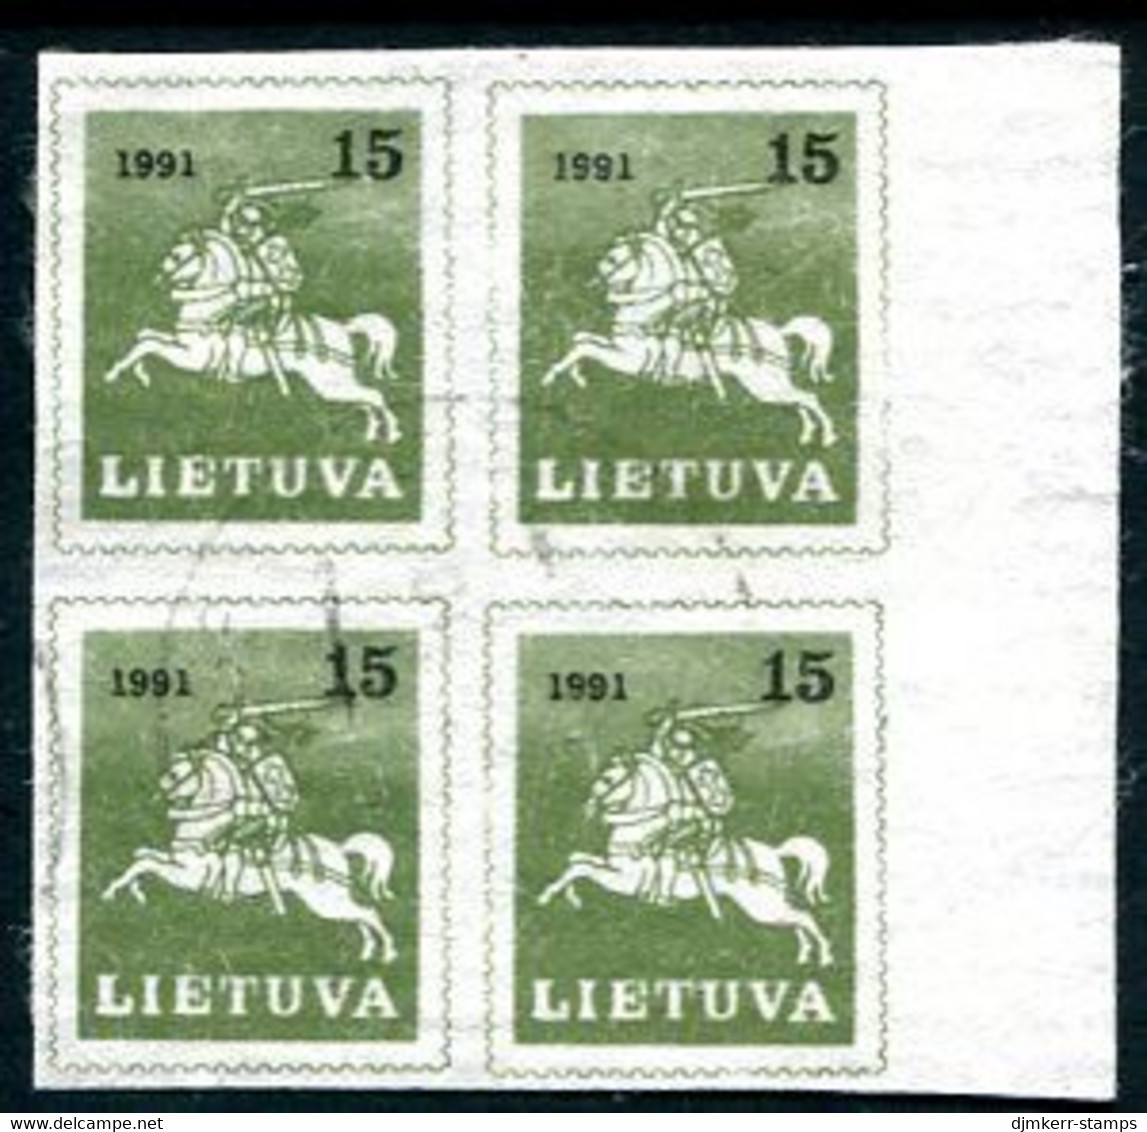 LITHUANIA 1991  Lithuanian Knight Definitive Imperforate Block Of 4 Used.  Michel 472 - Litouwen